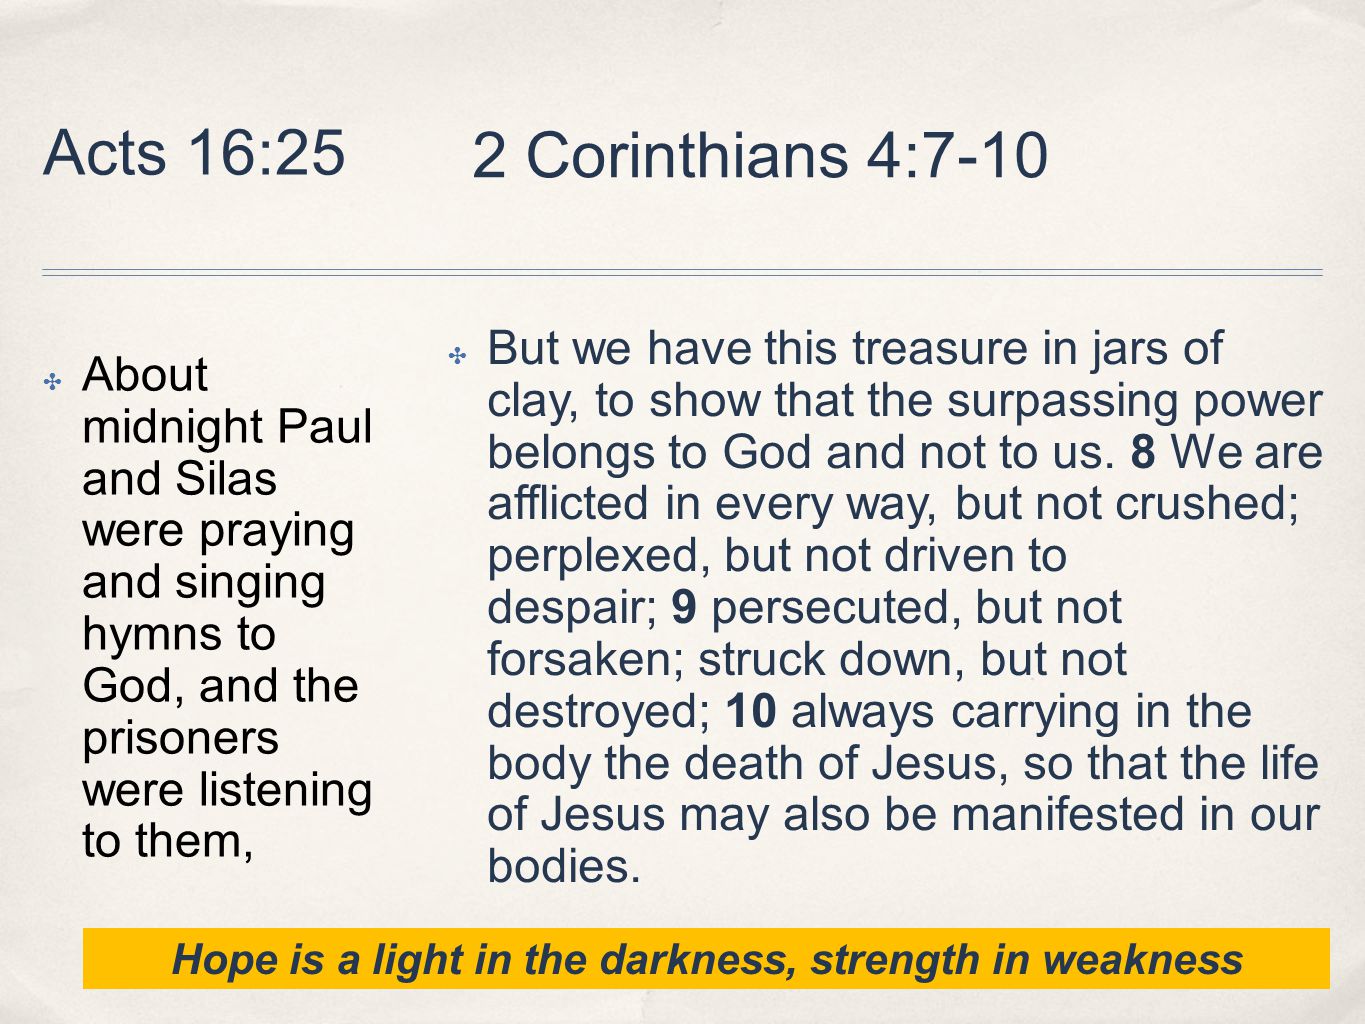 Acts 16:25 ✤ About midnight Paul and Silas were praying and singing hymns to God, and the prisoners were listening to them, ✤ But we have this treasure in jars of clay, to show that the surpassing power belongs to God and not to us.